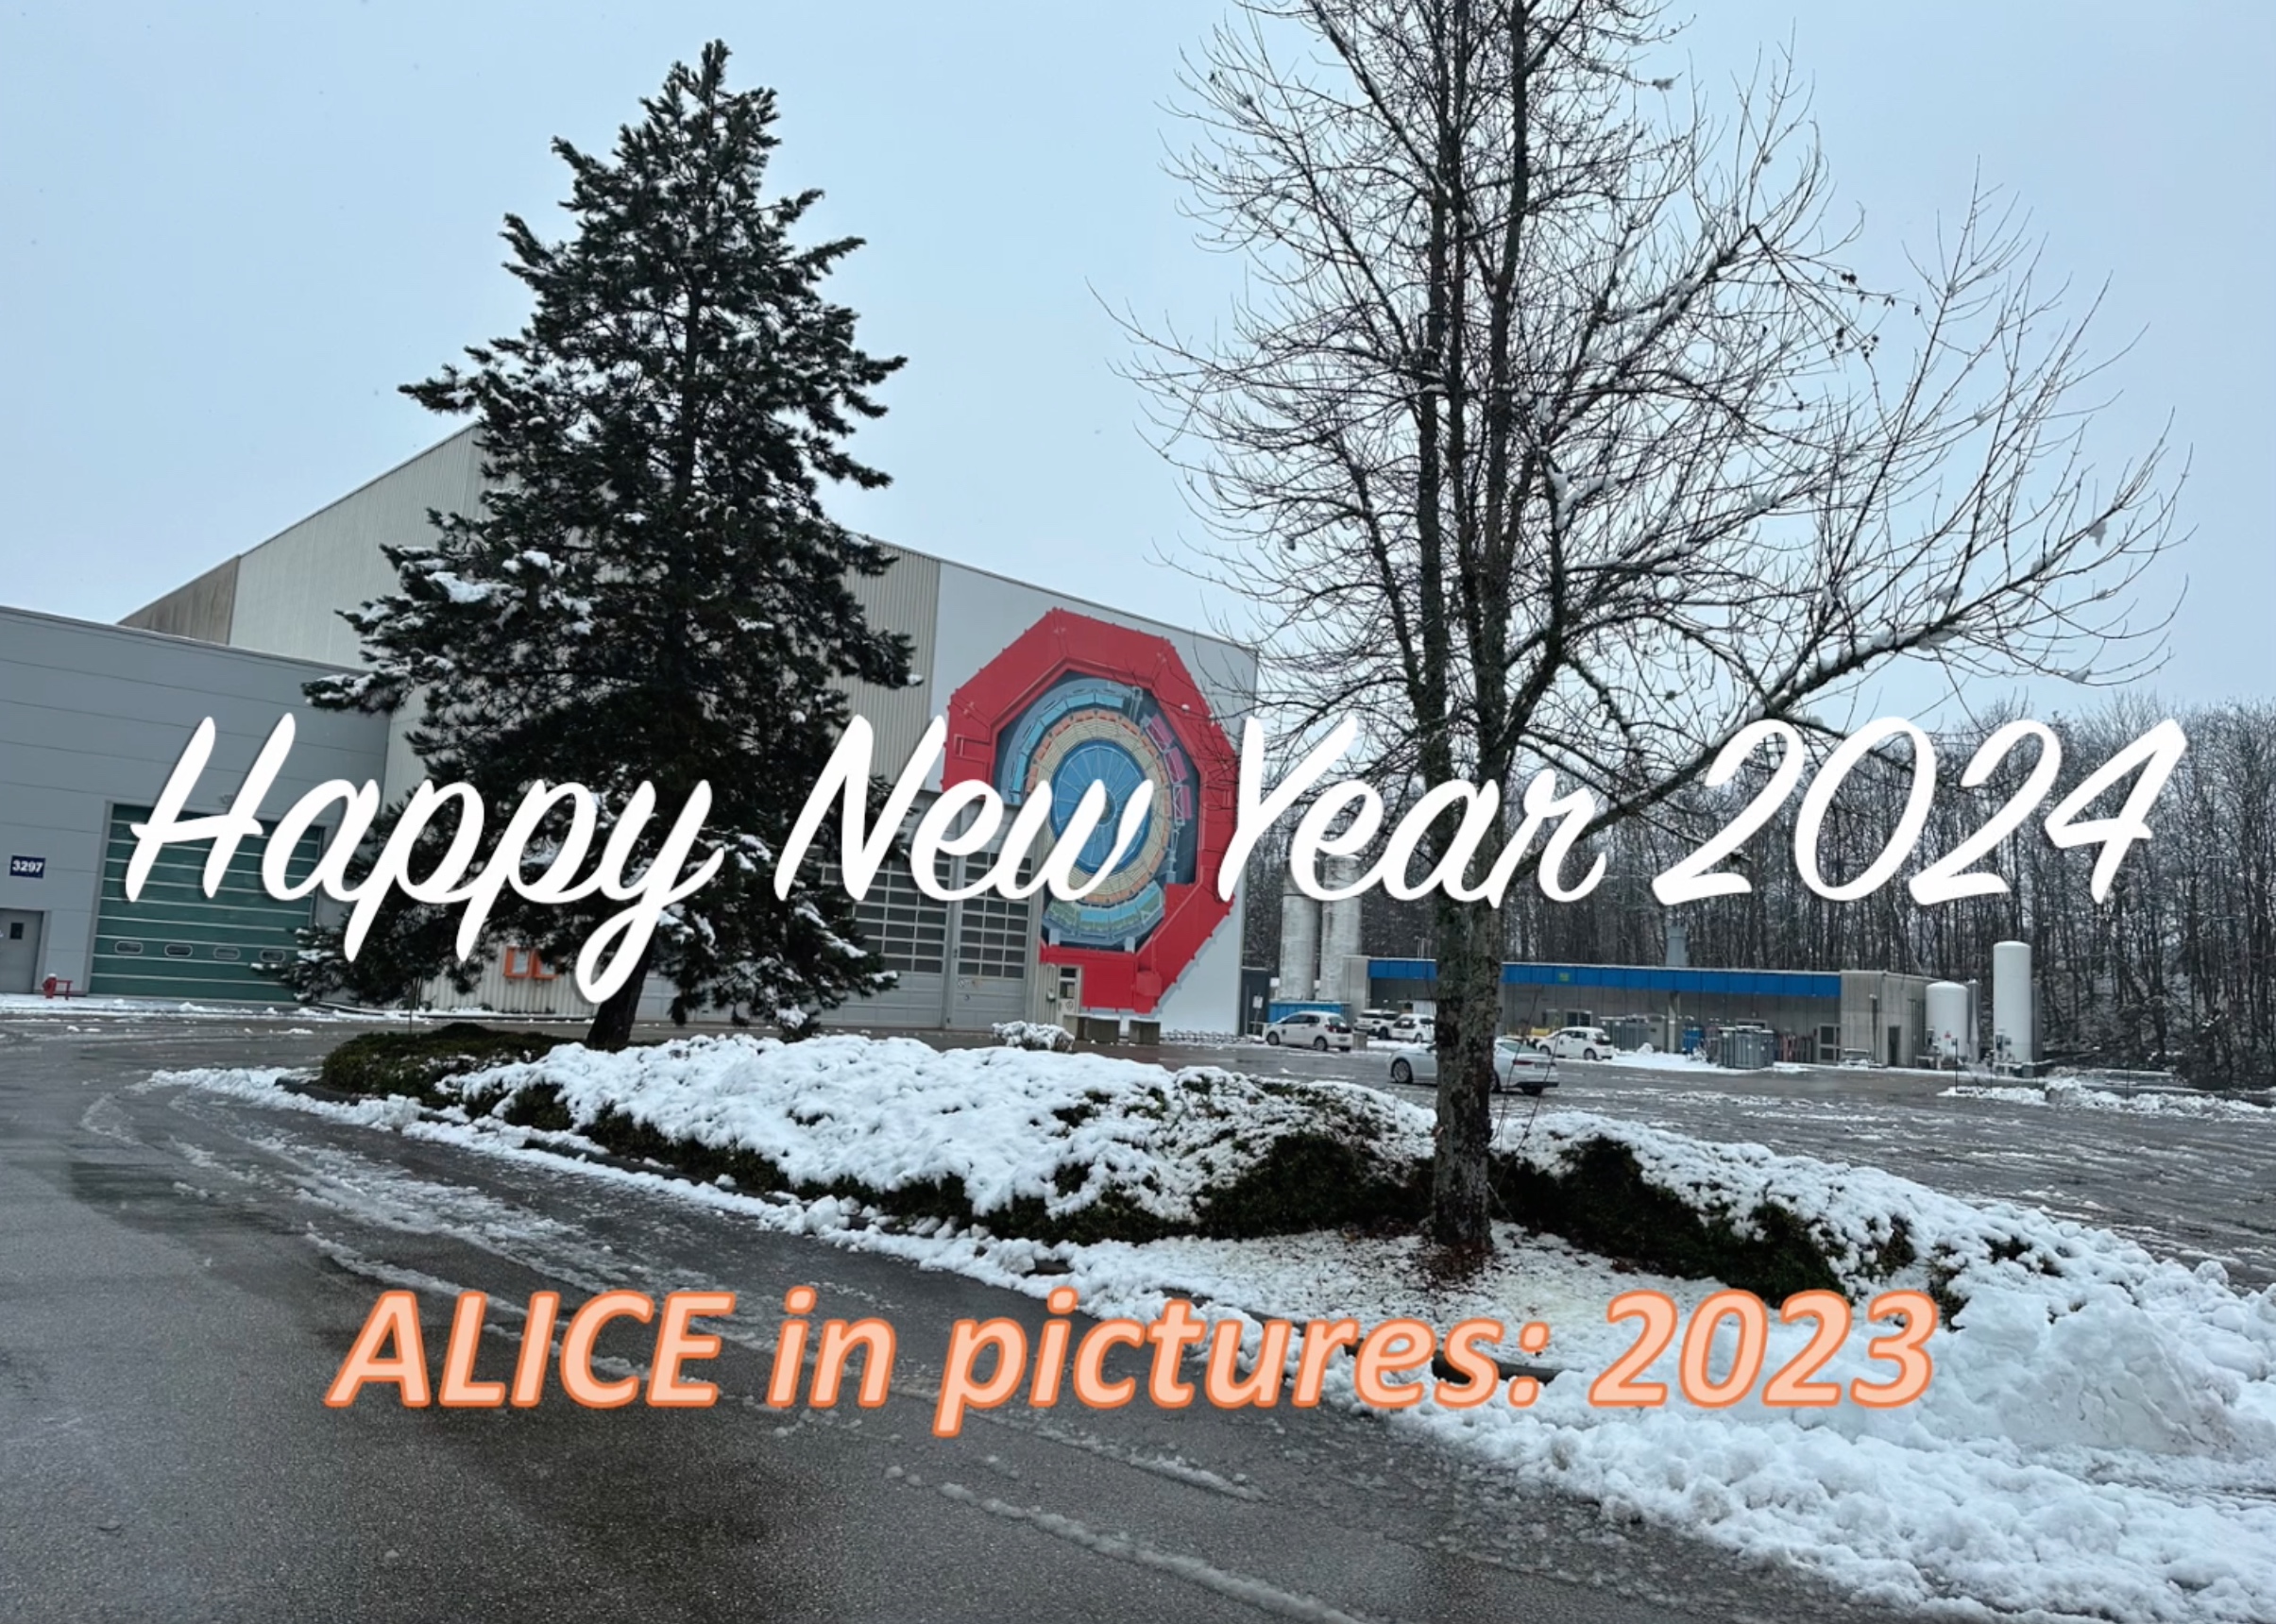 ALICE in pictures: 2024